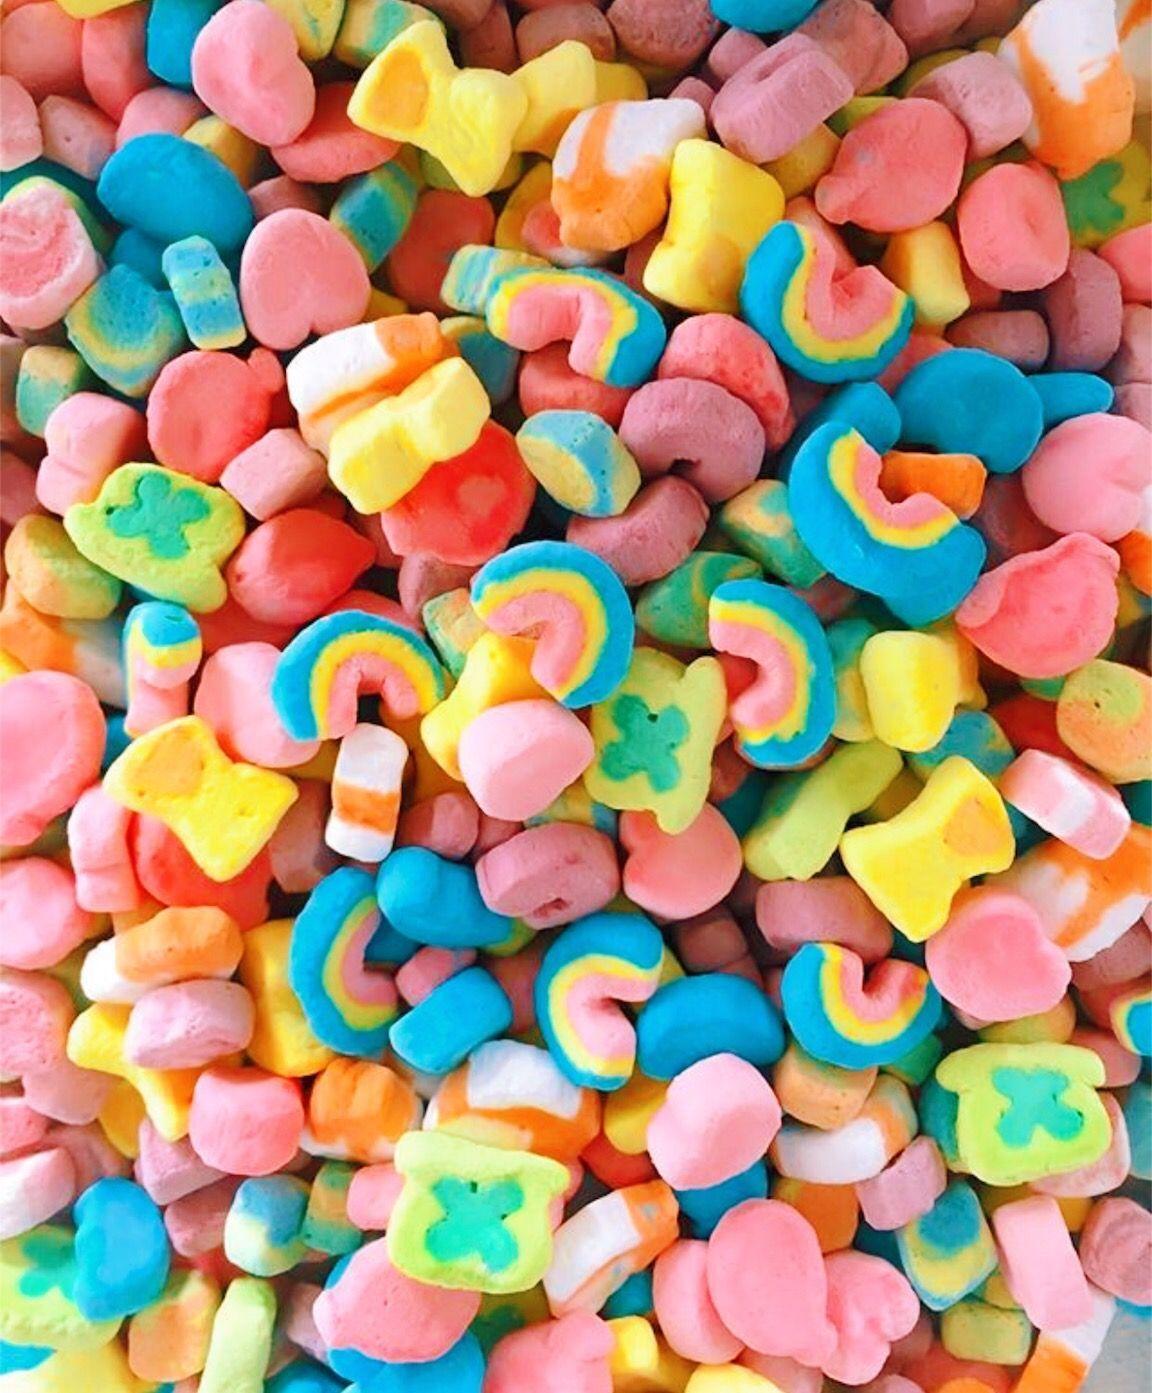 Candy Aesthetic Wallpapers Top Free Candy Aesthetic Backgrounds WallpaperAccess